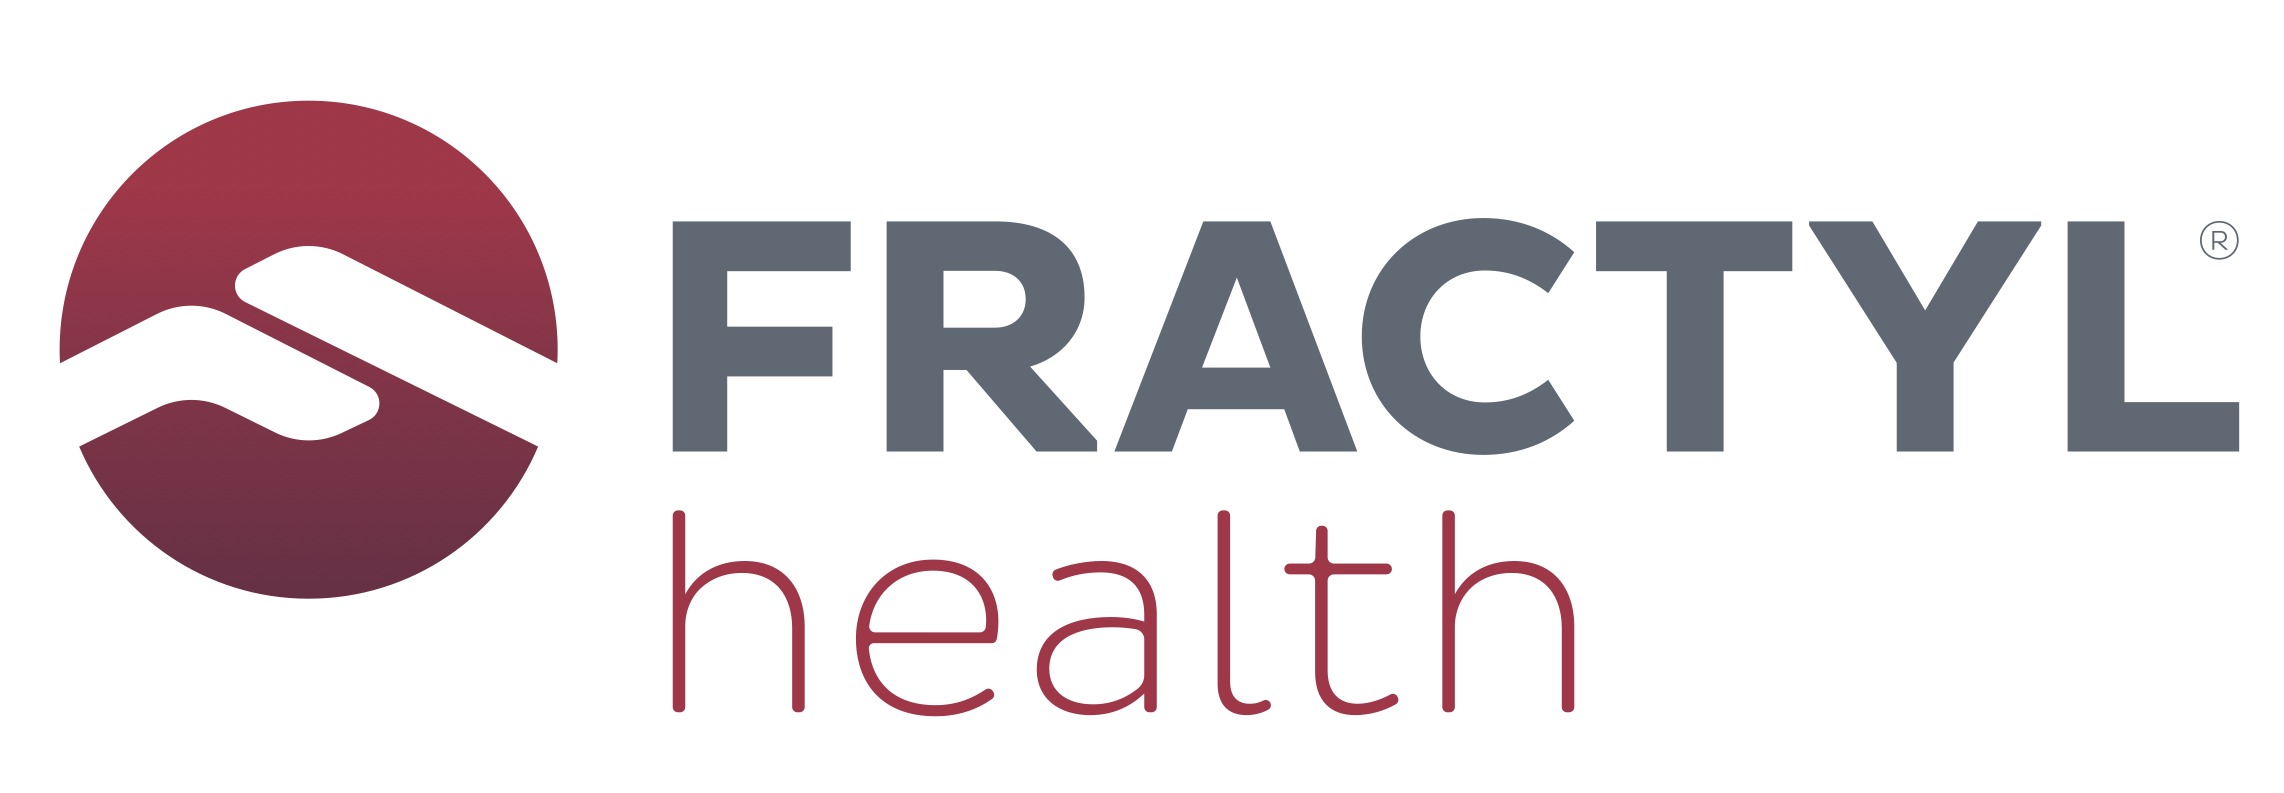 Fractyl Health Presents New Preclinical Data on Sustained Weight Maintenance and Improved Body Composition from its Rejuva® Single-Administration GLP-1 Pancreatic Gene Therapy in President’s Select Oral Presentation at the American Diabetes Association’s 84th Scientific Sessions